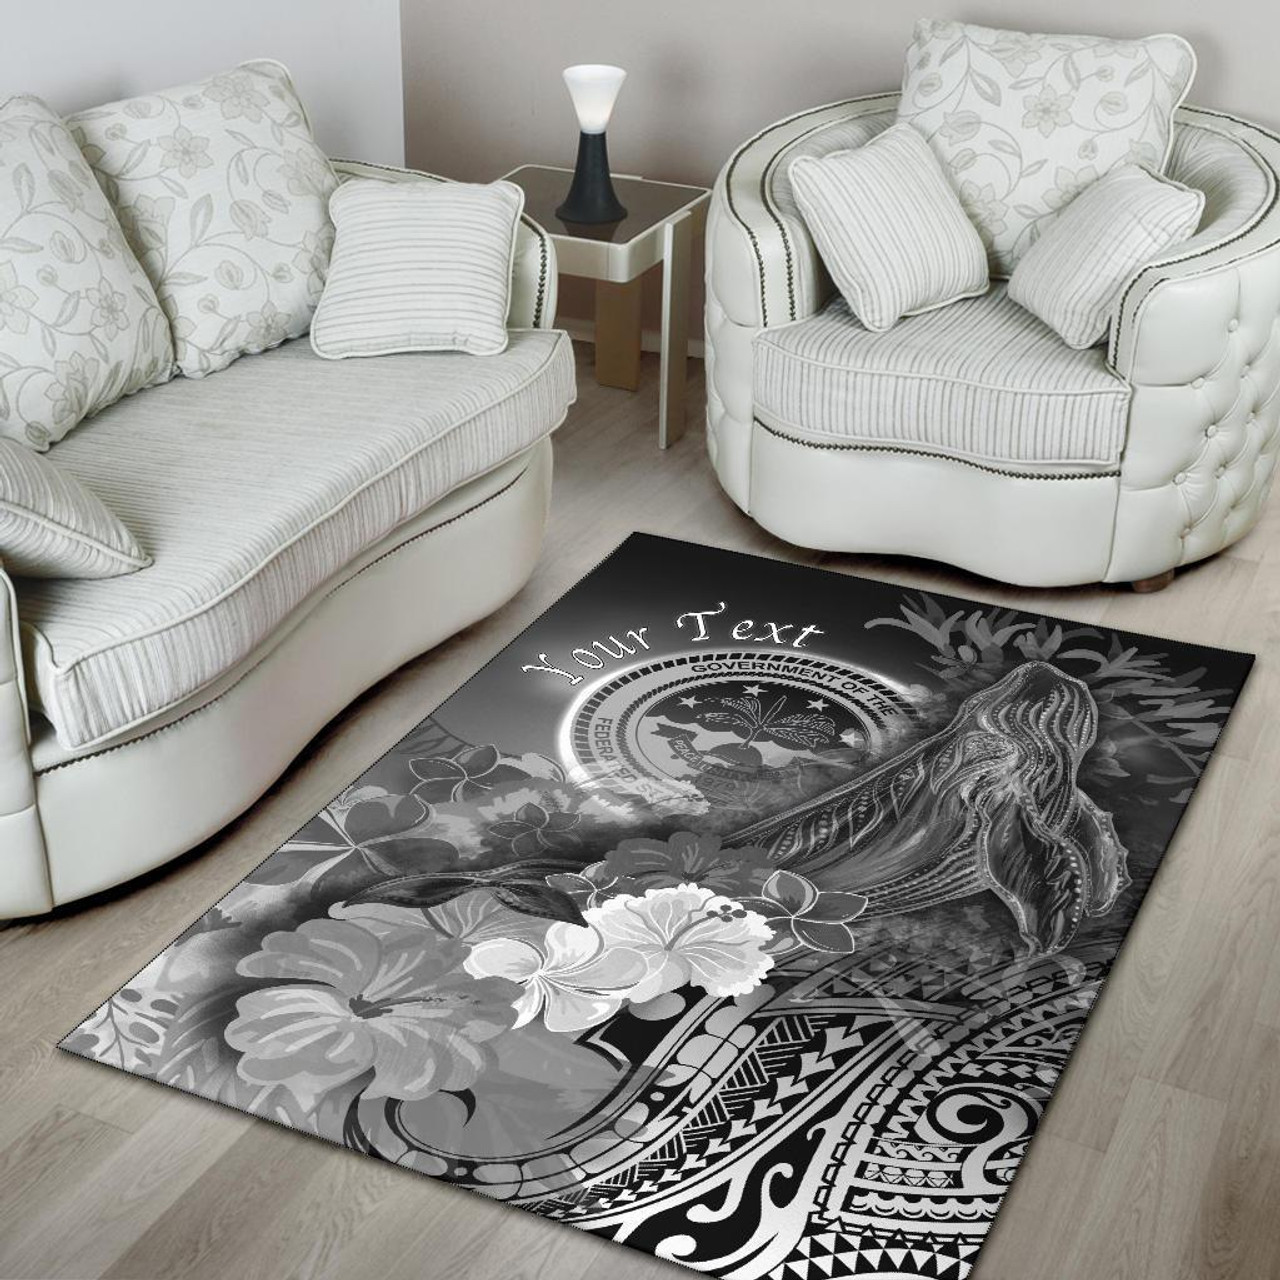 Federated States of Micronesia Custom Personalised Area Rug - Humpback Whale with Tropical Flowers (White) Polynesian 4